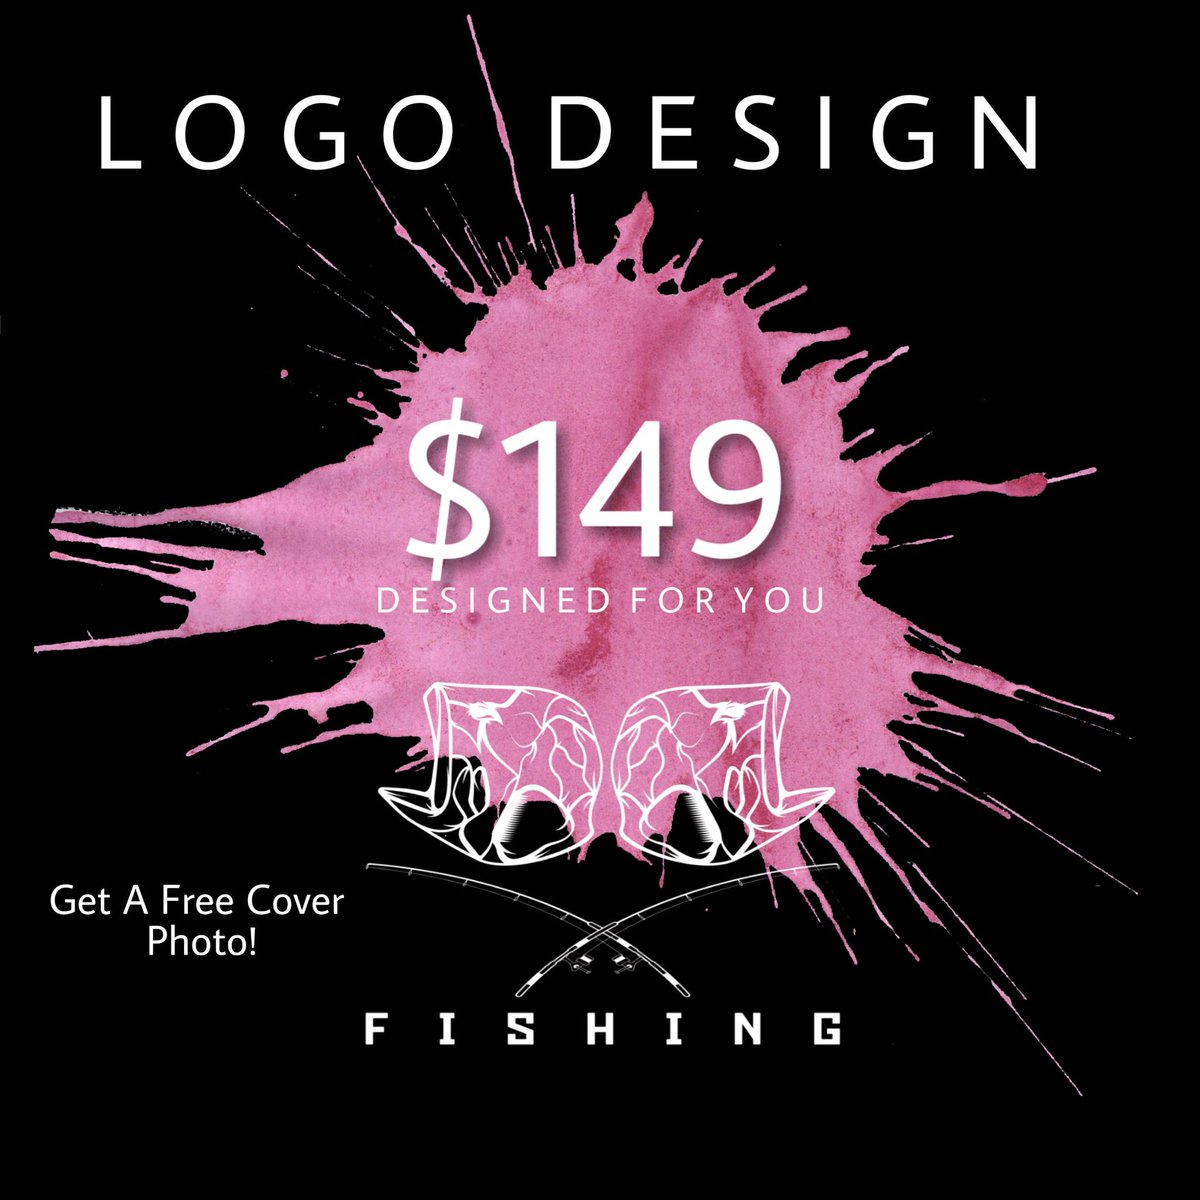 Needing a #fishing logo? Business Cards, YouTube Banner?  Let me design it for you!  Order NOW and get a #FREE Facebook, Instagram or Twitter cover photo! #DesignedForYou